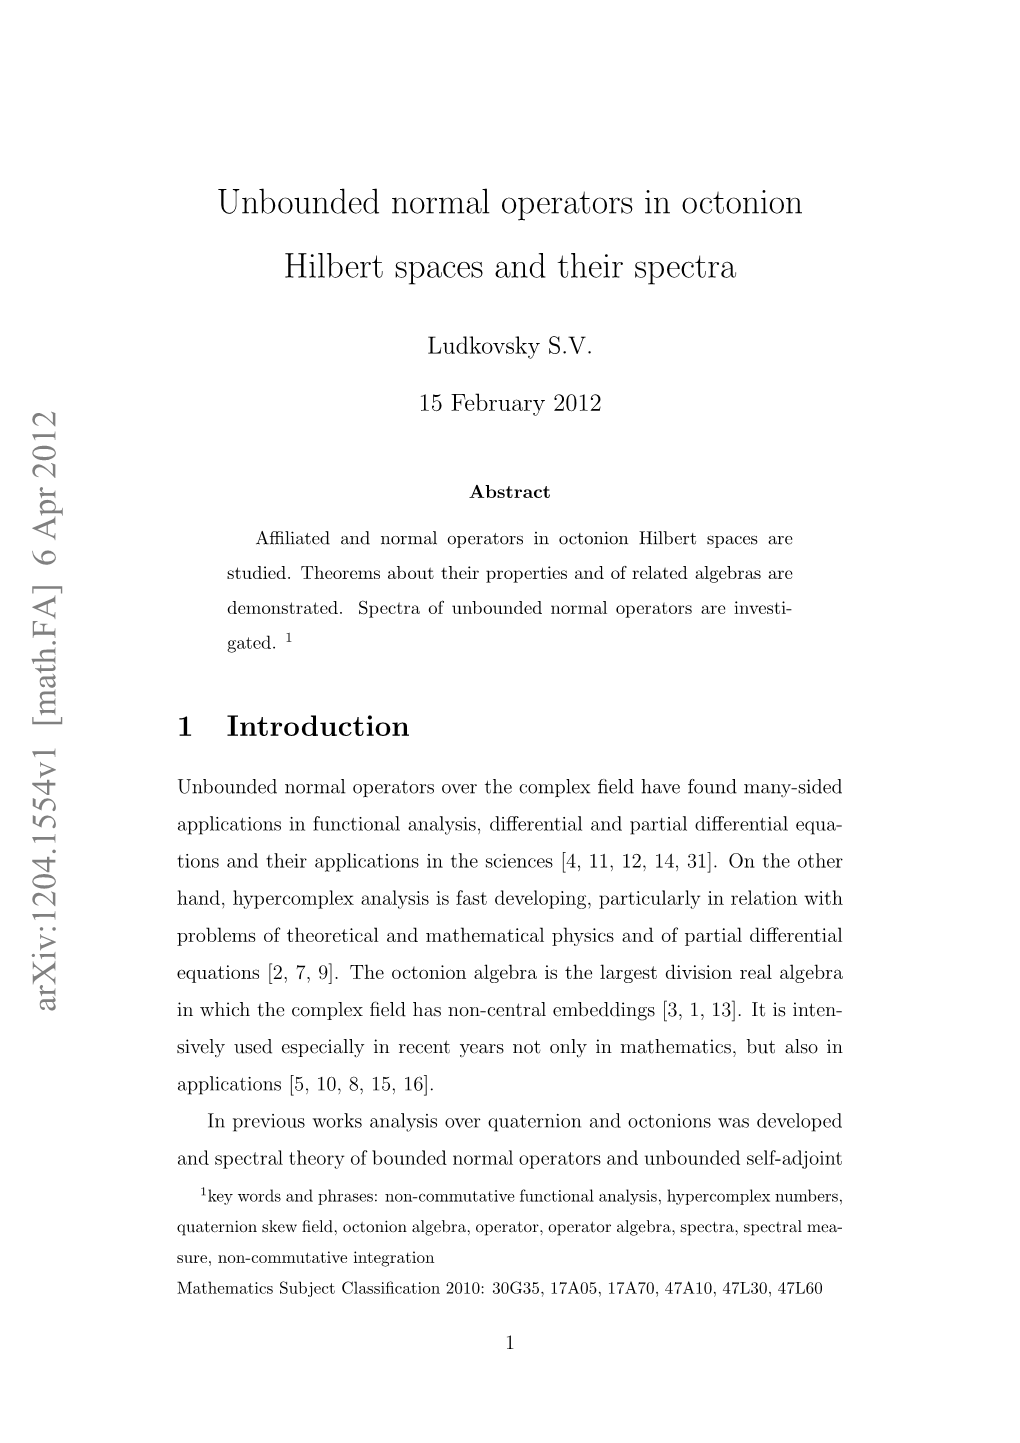 Unbounded Normal Operators in Octonion Hilbert Spaces and Their